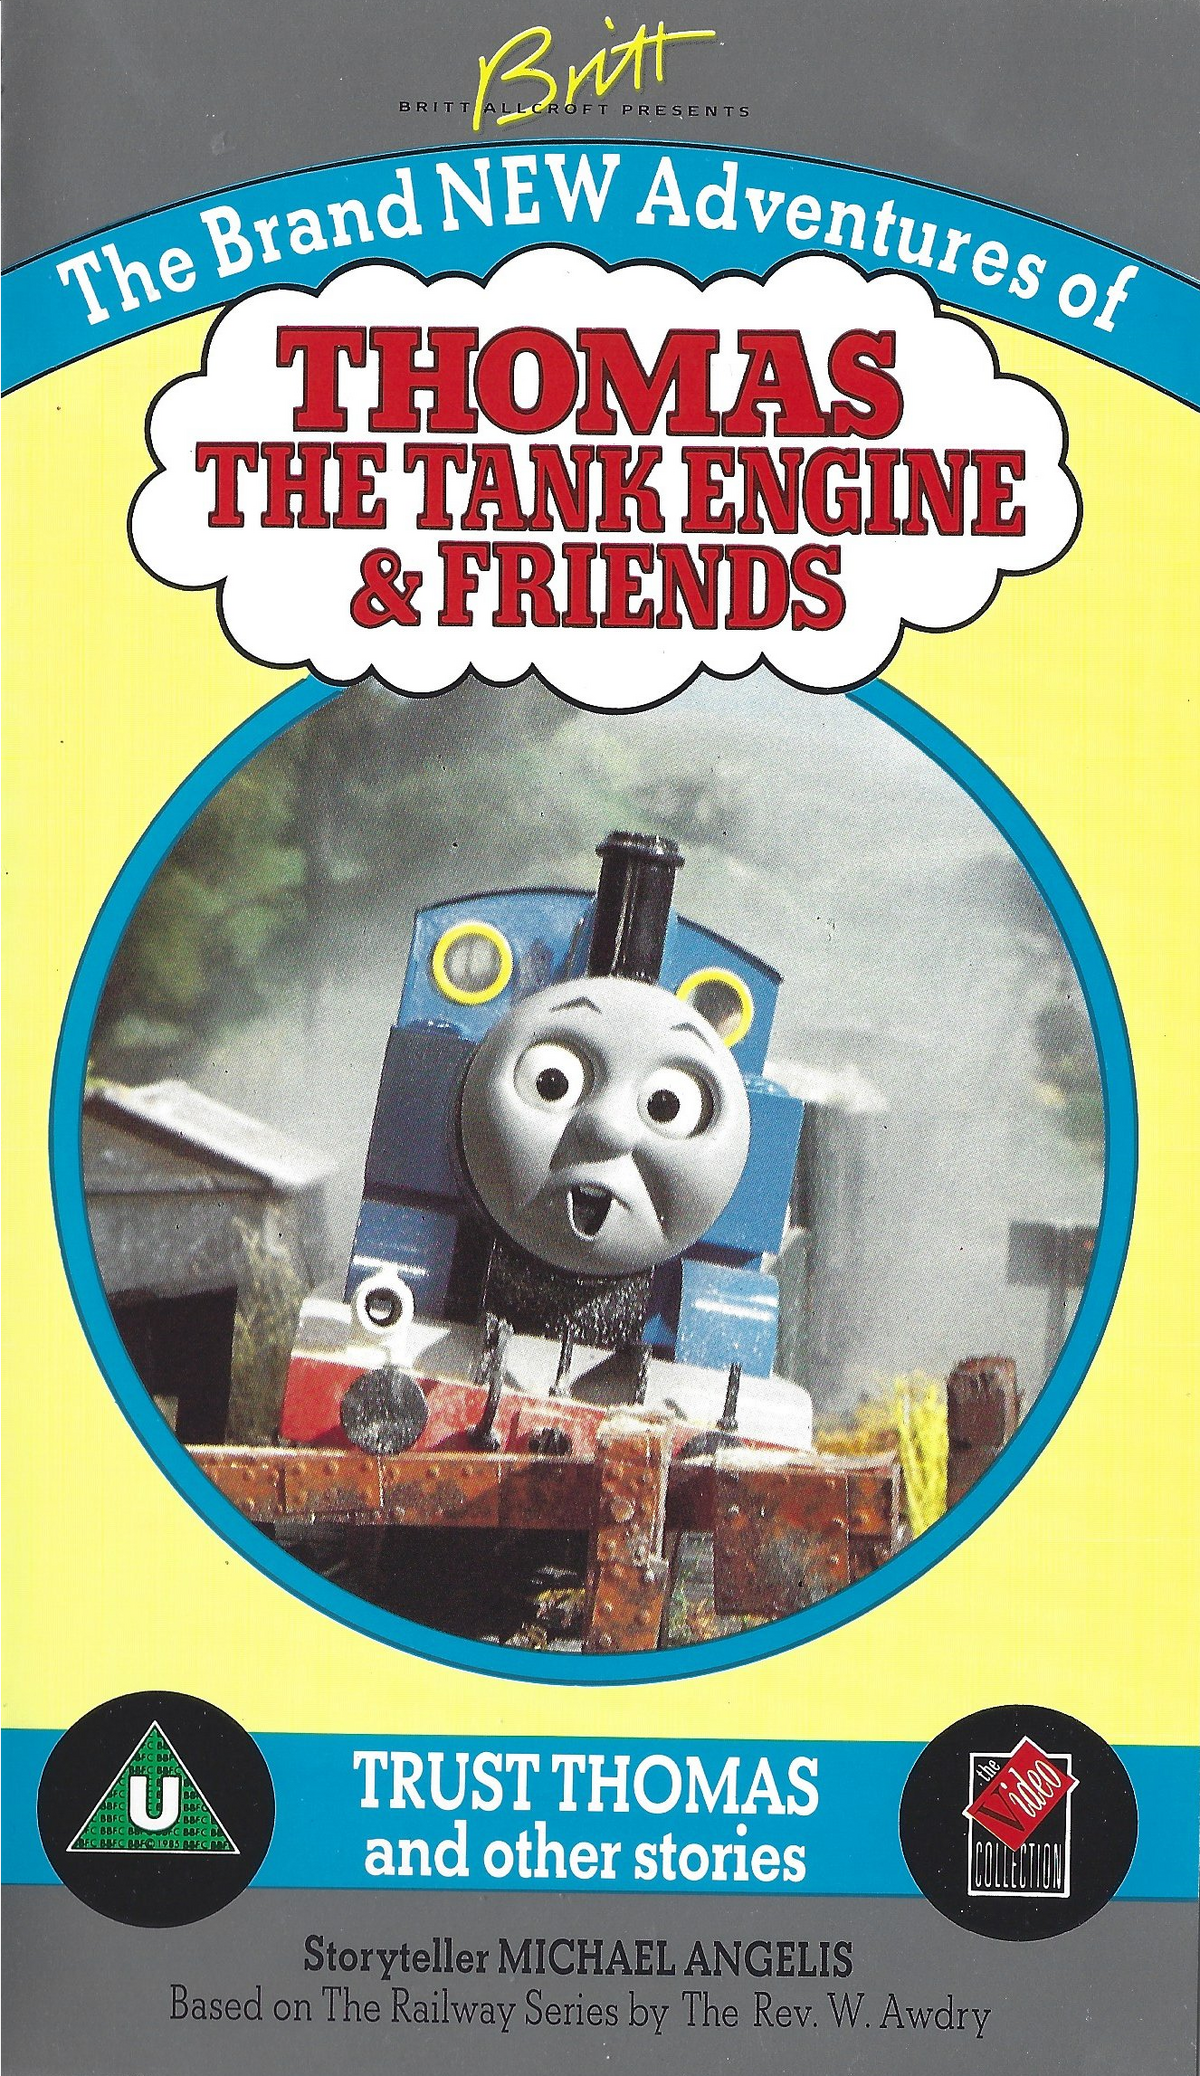 Trust Thomas and Other Stories | Thomas the Tank Engine Wiki | Fandom